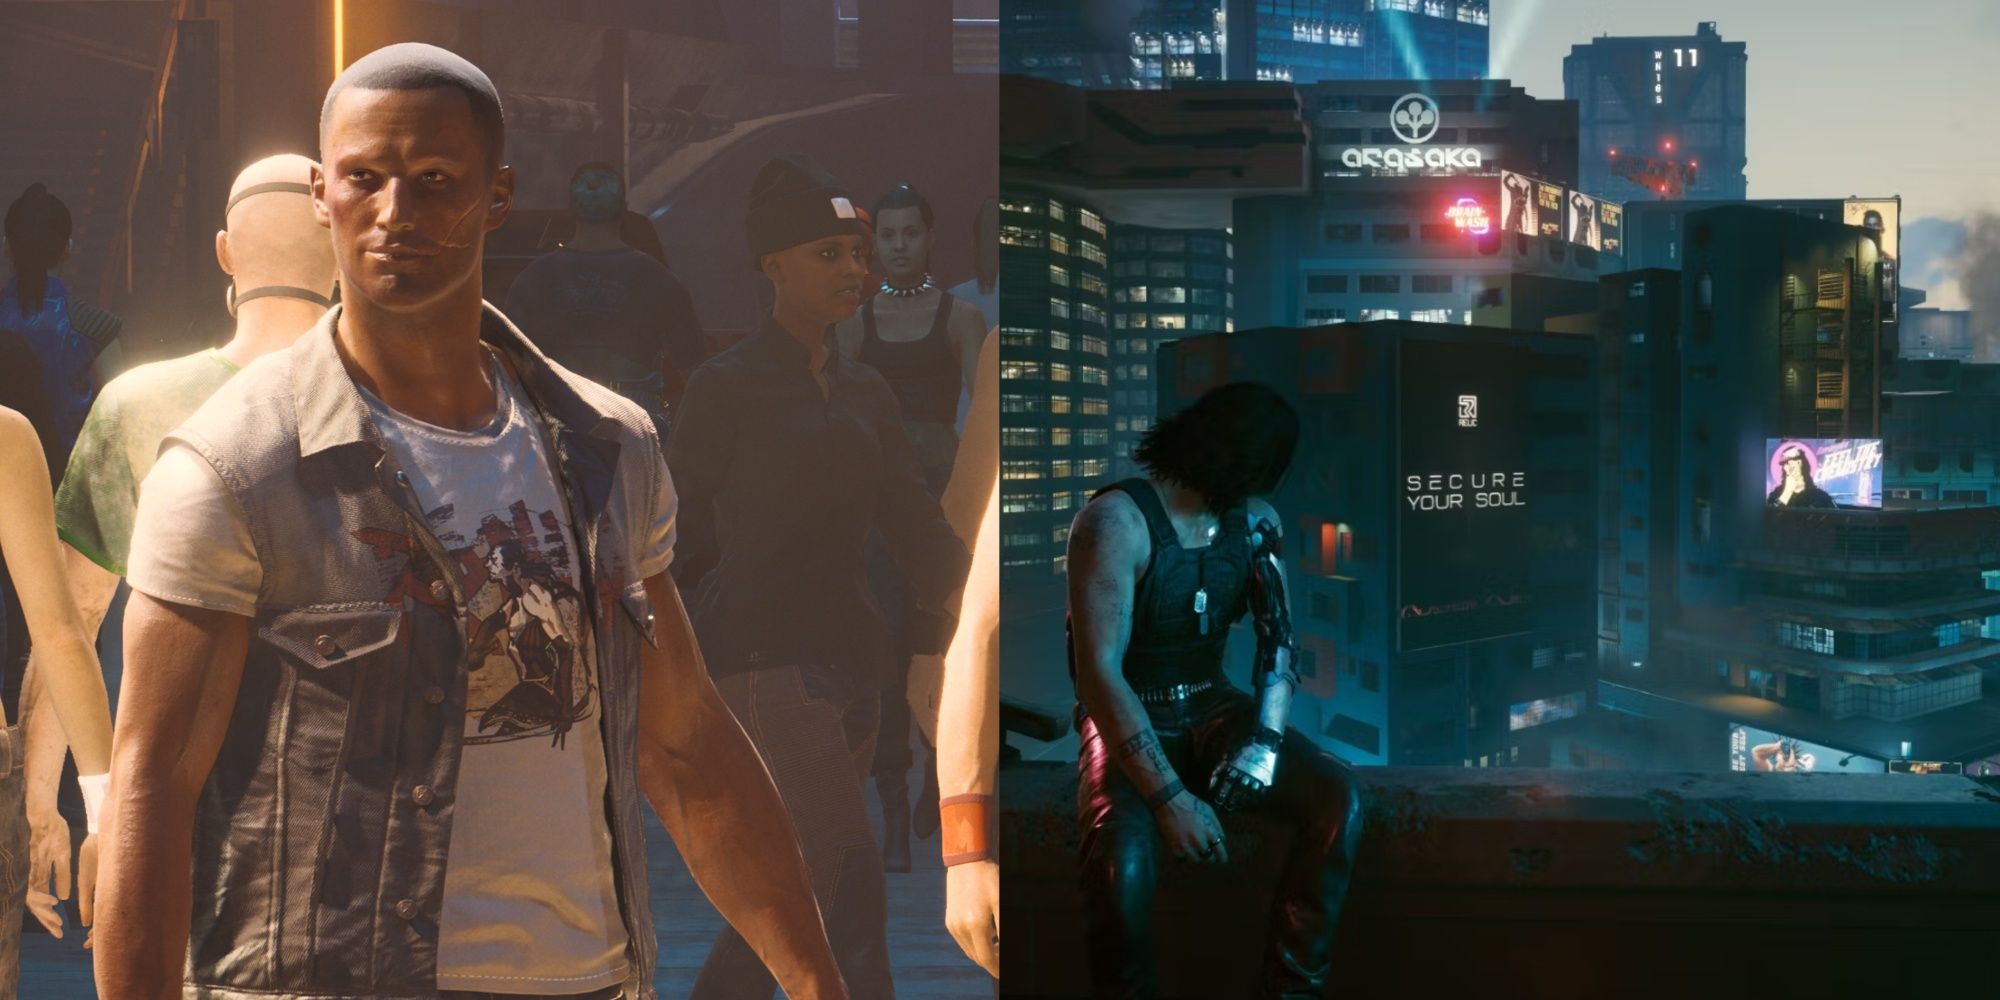 V in the Phantom Liberty exclusive ending, and Johnny in the normal ending situation you get in Cyberpunk 2077